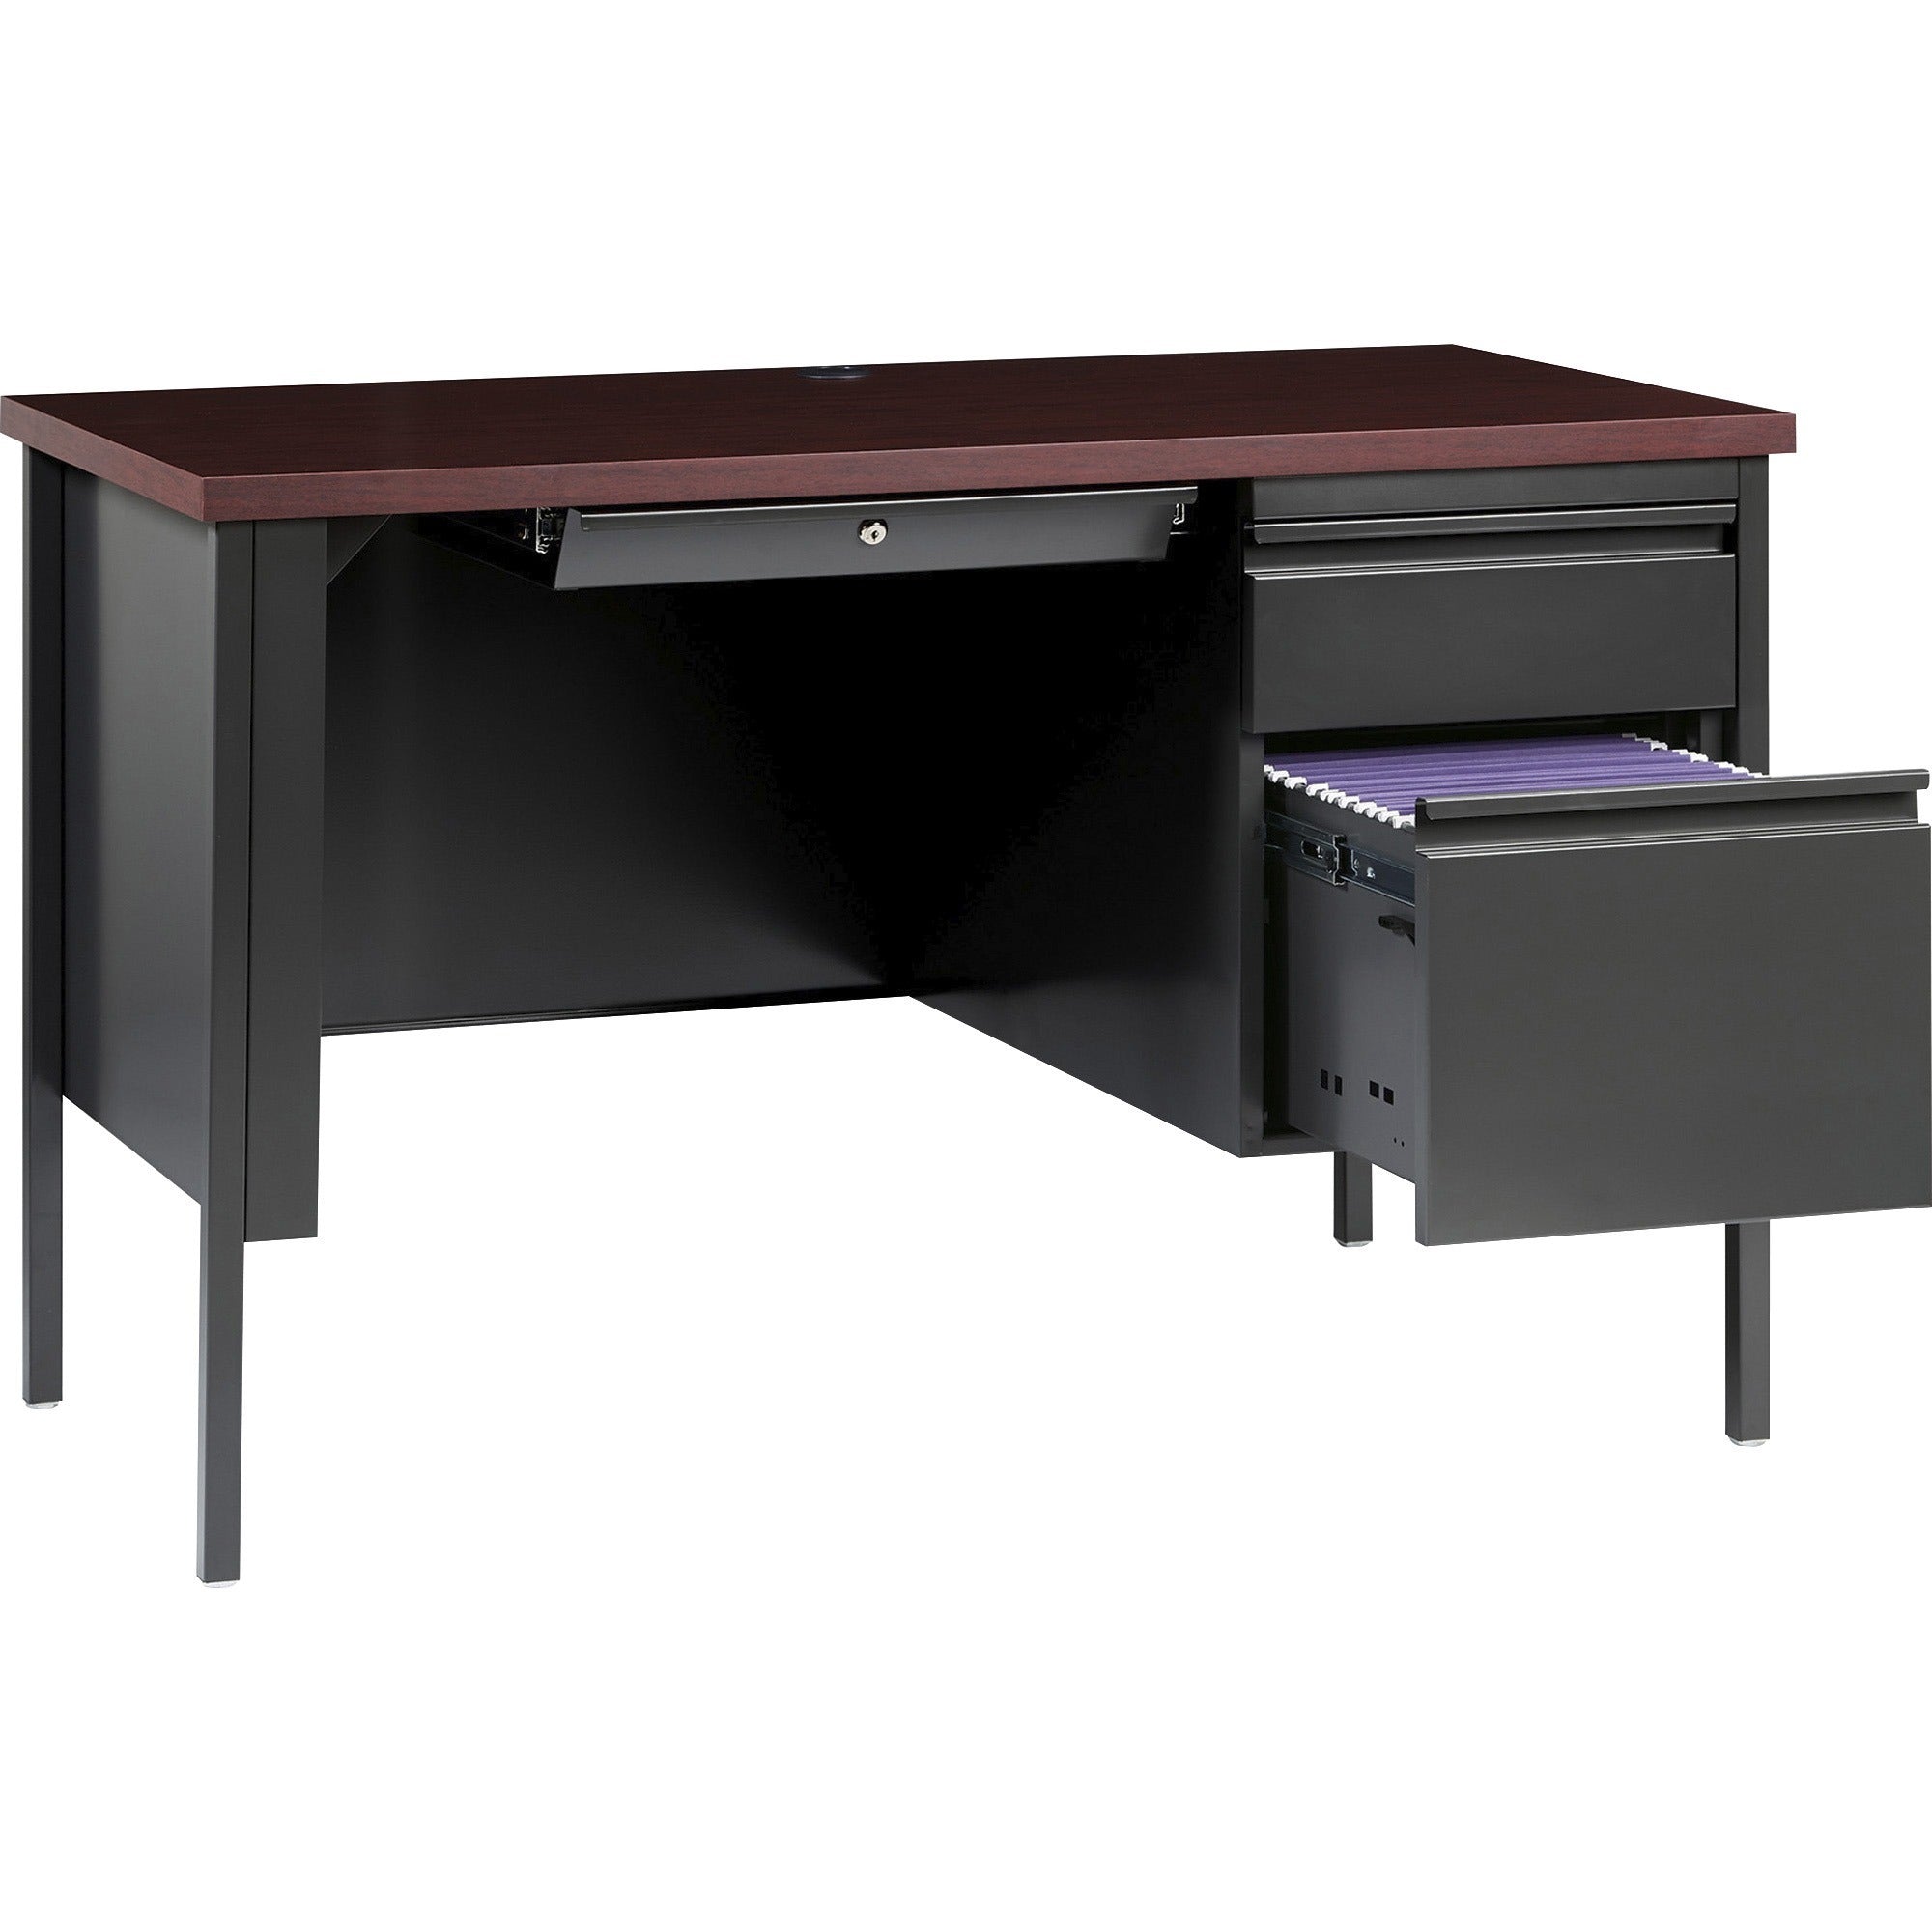 lorell-fortress-series-45-1-2-right-single-pedestal-desk-455-x-24295--11-top-box-file-drawers-single-pedestal-on-right-side-square-edge_llr66949 - 4